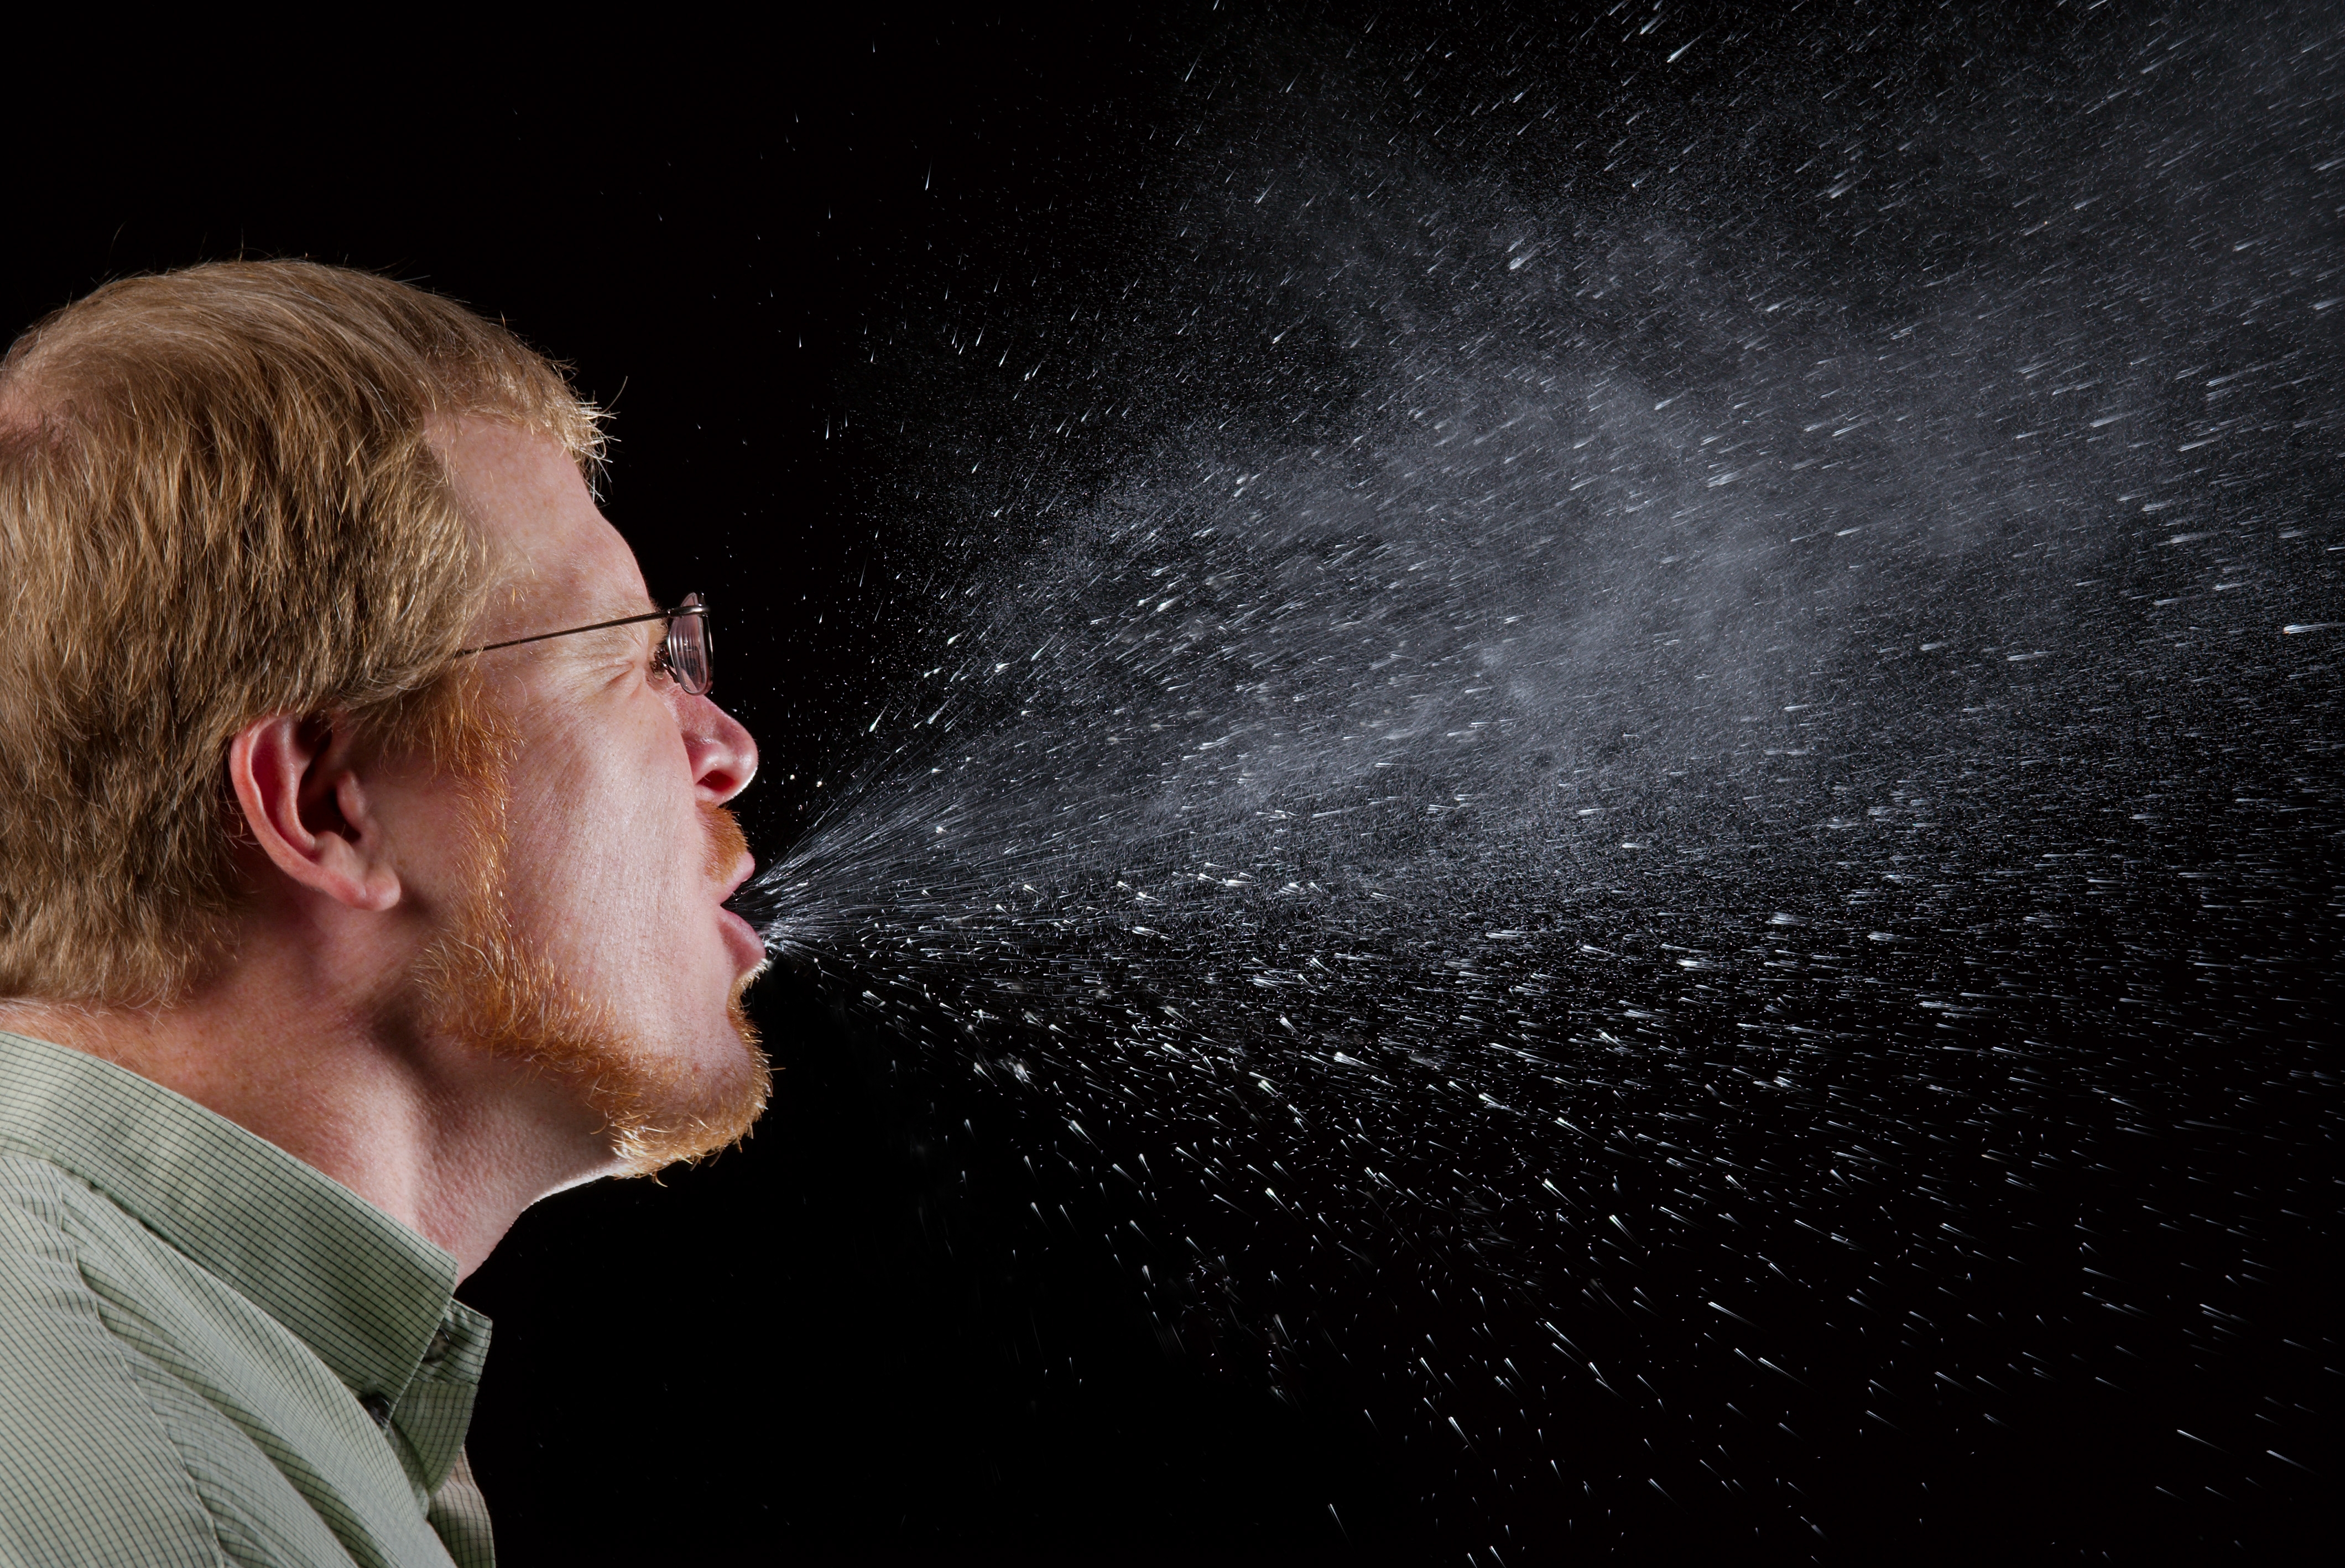 The Reason Why We Should Cover Our Mouth When We Sneeze